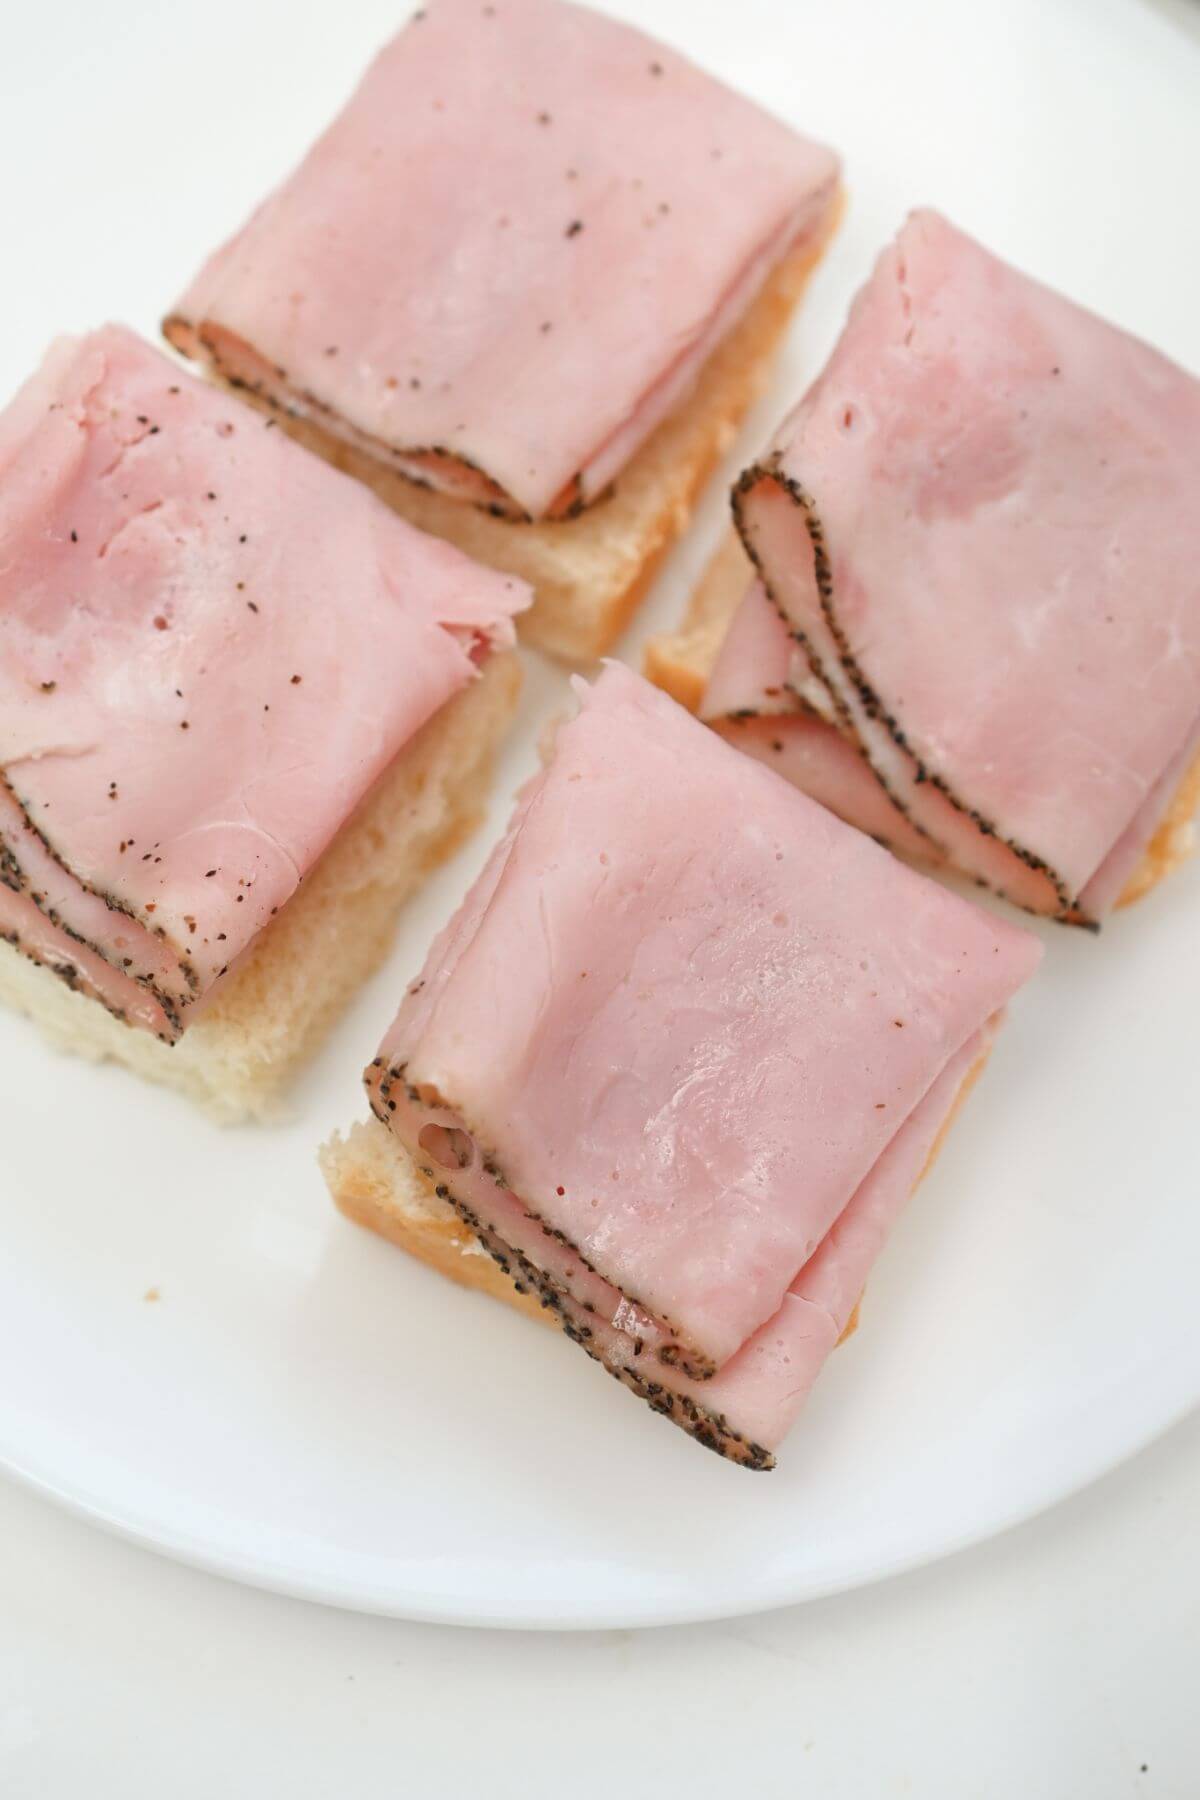 Four slices of ham on a white plate.